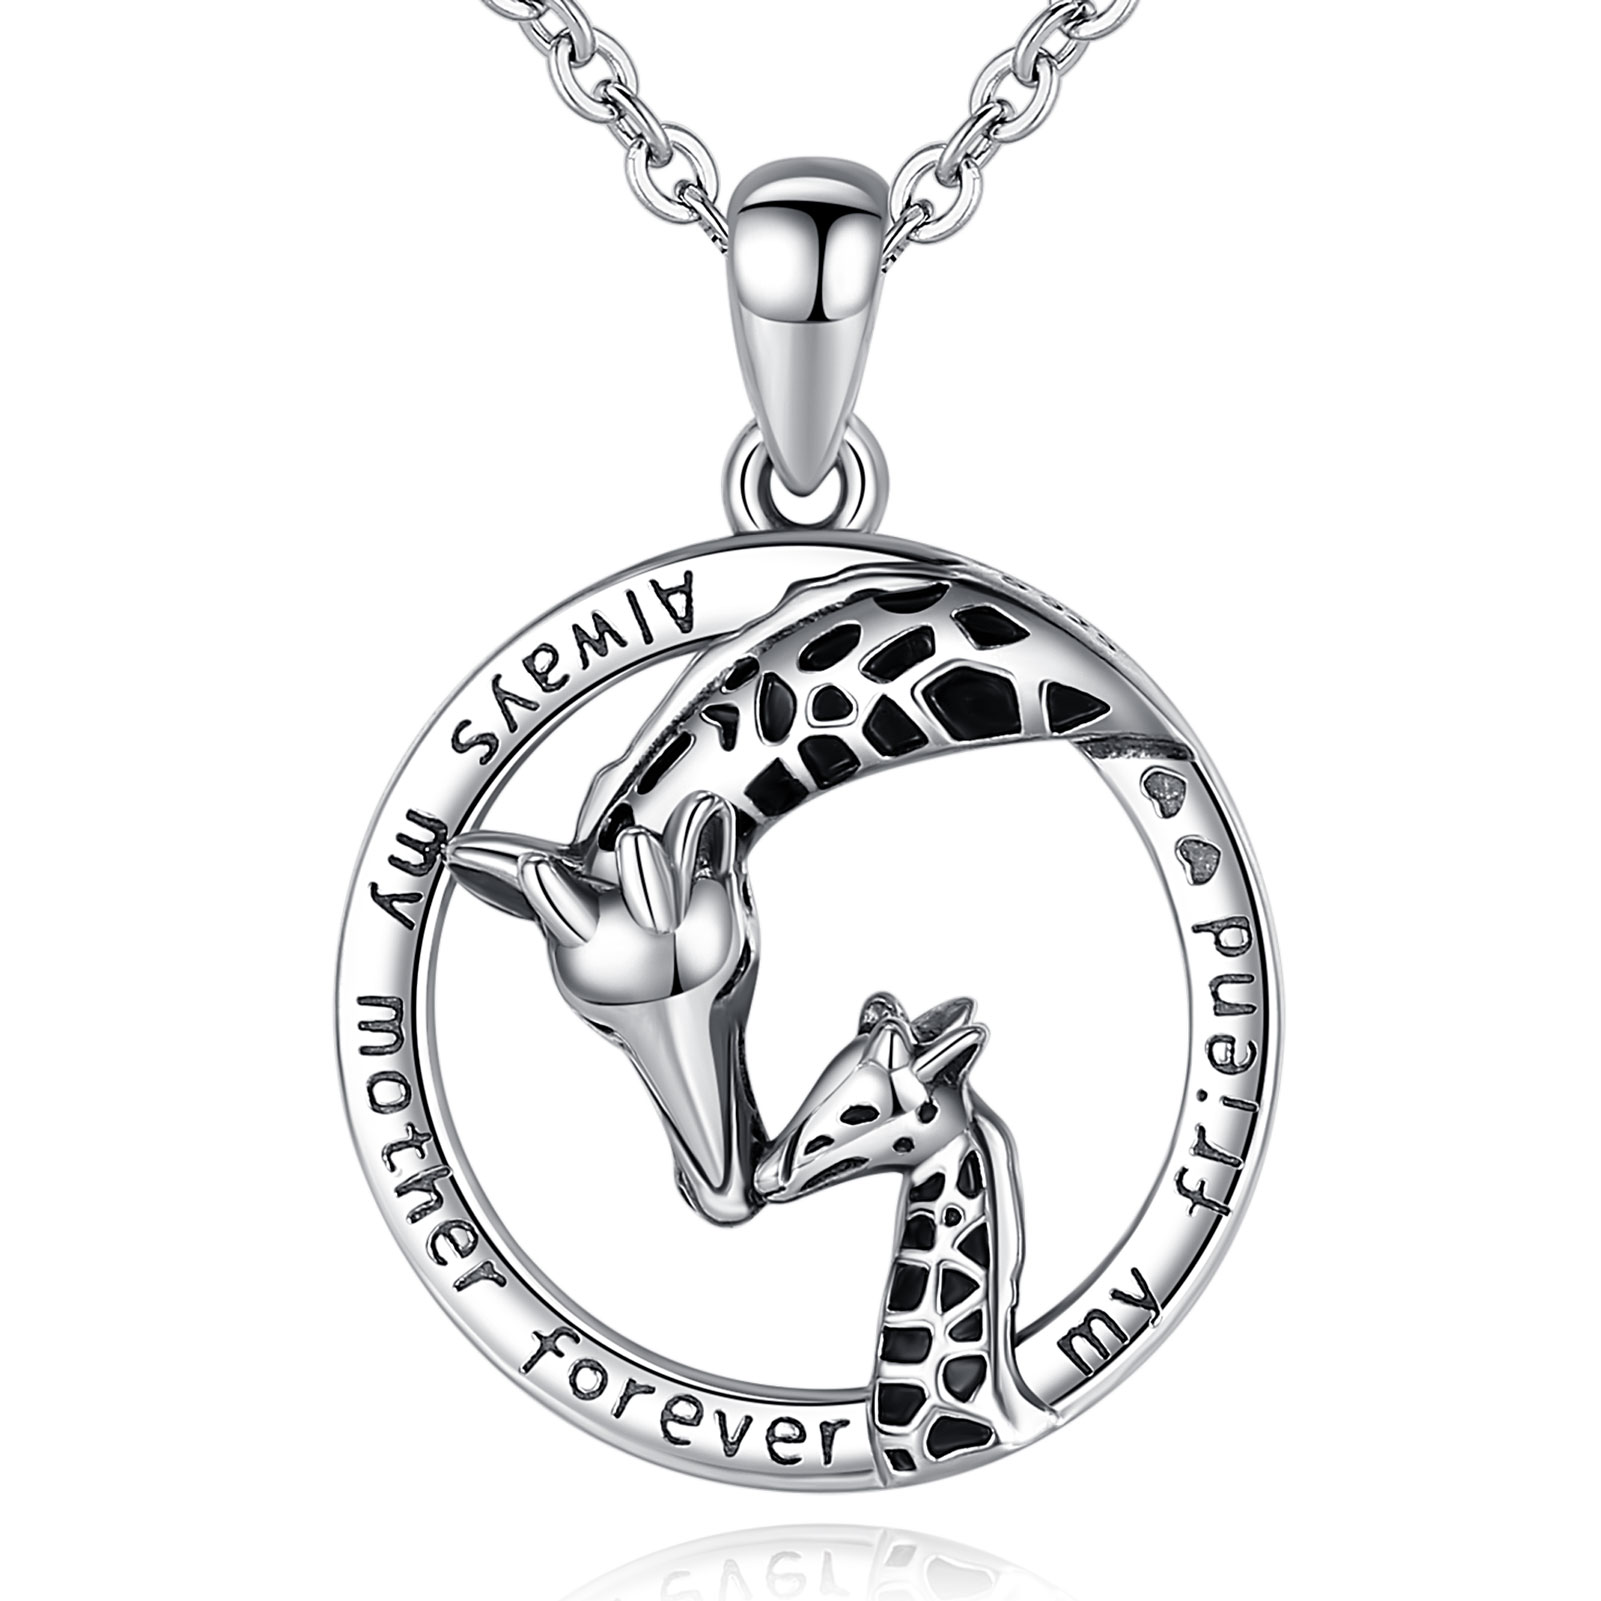 Merryshine Jewelry S925 Sterling Silver Giraffe Mother and Calf Necklace for Mothers Day Gift